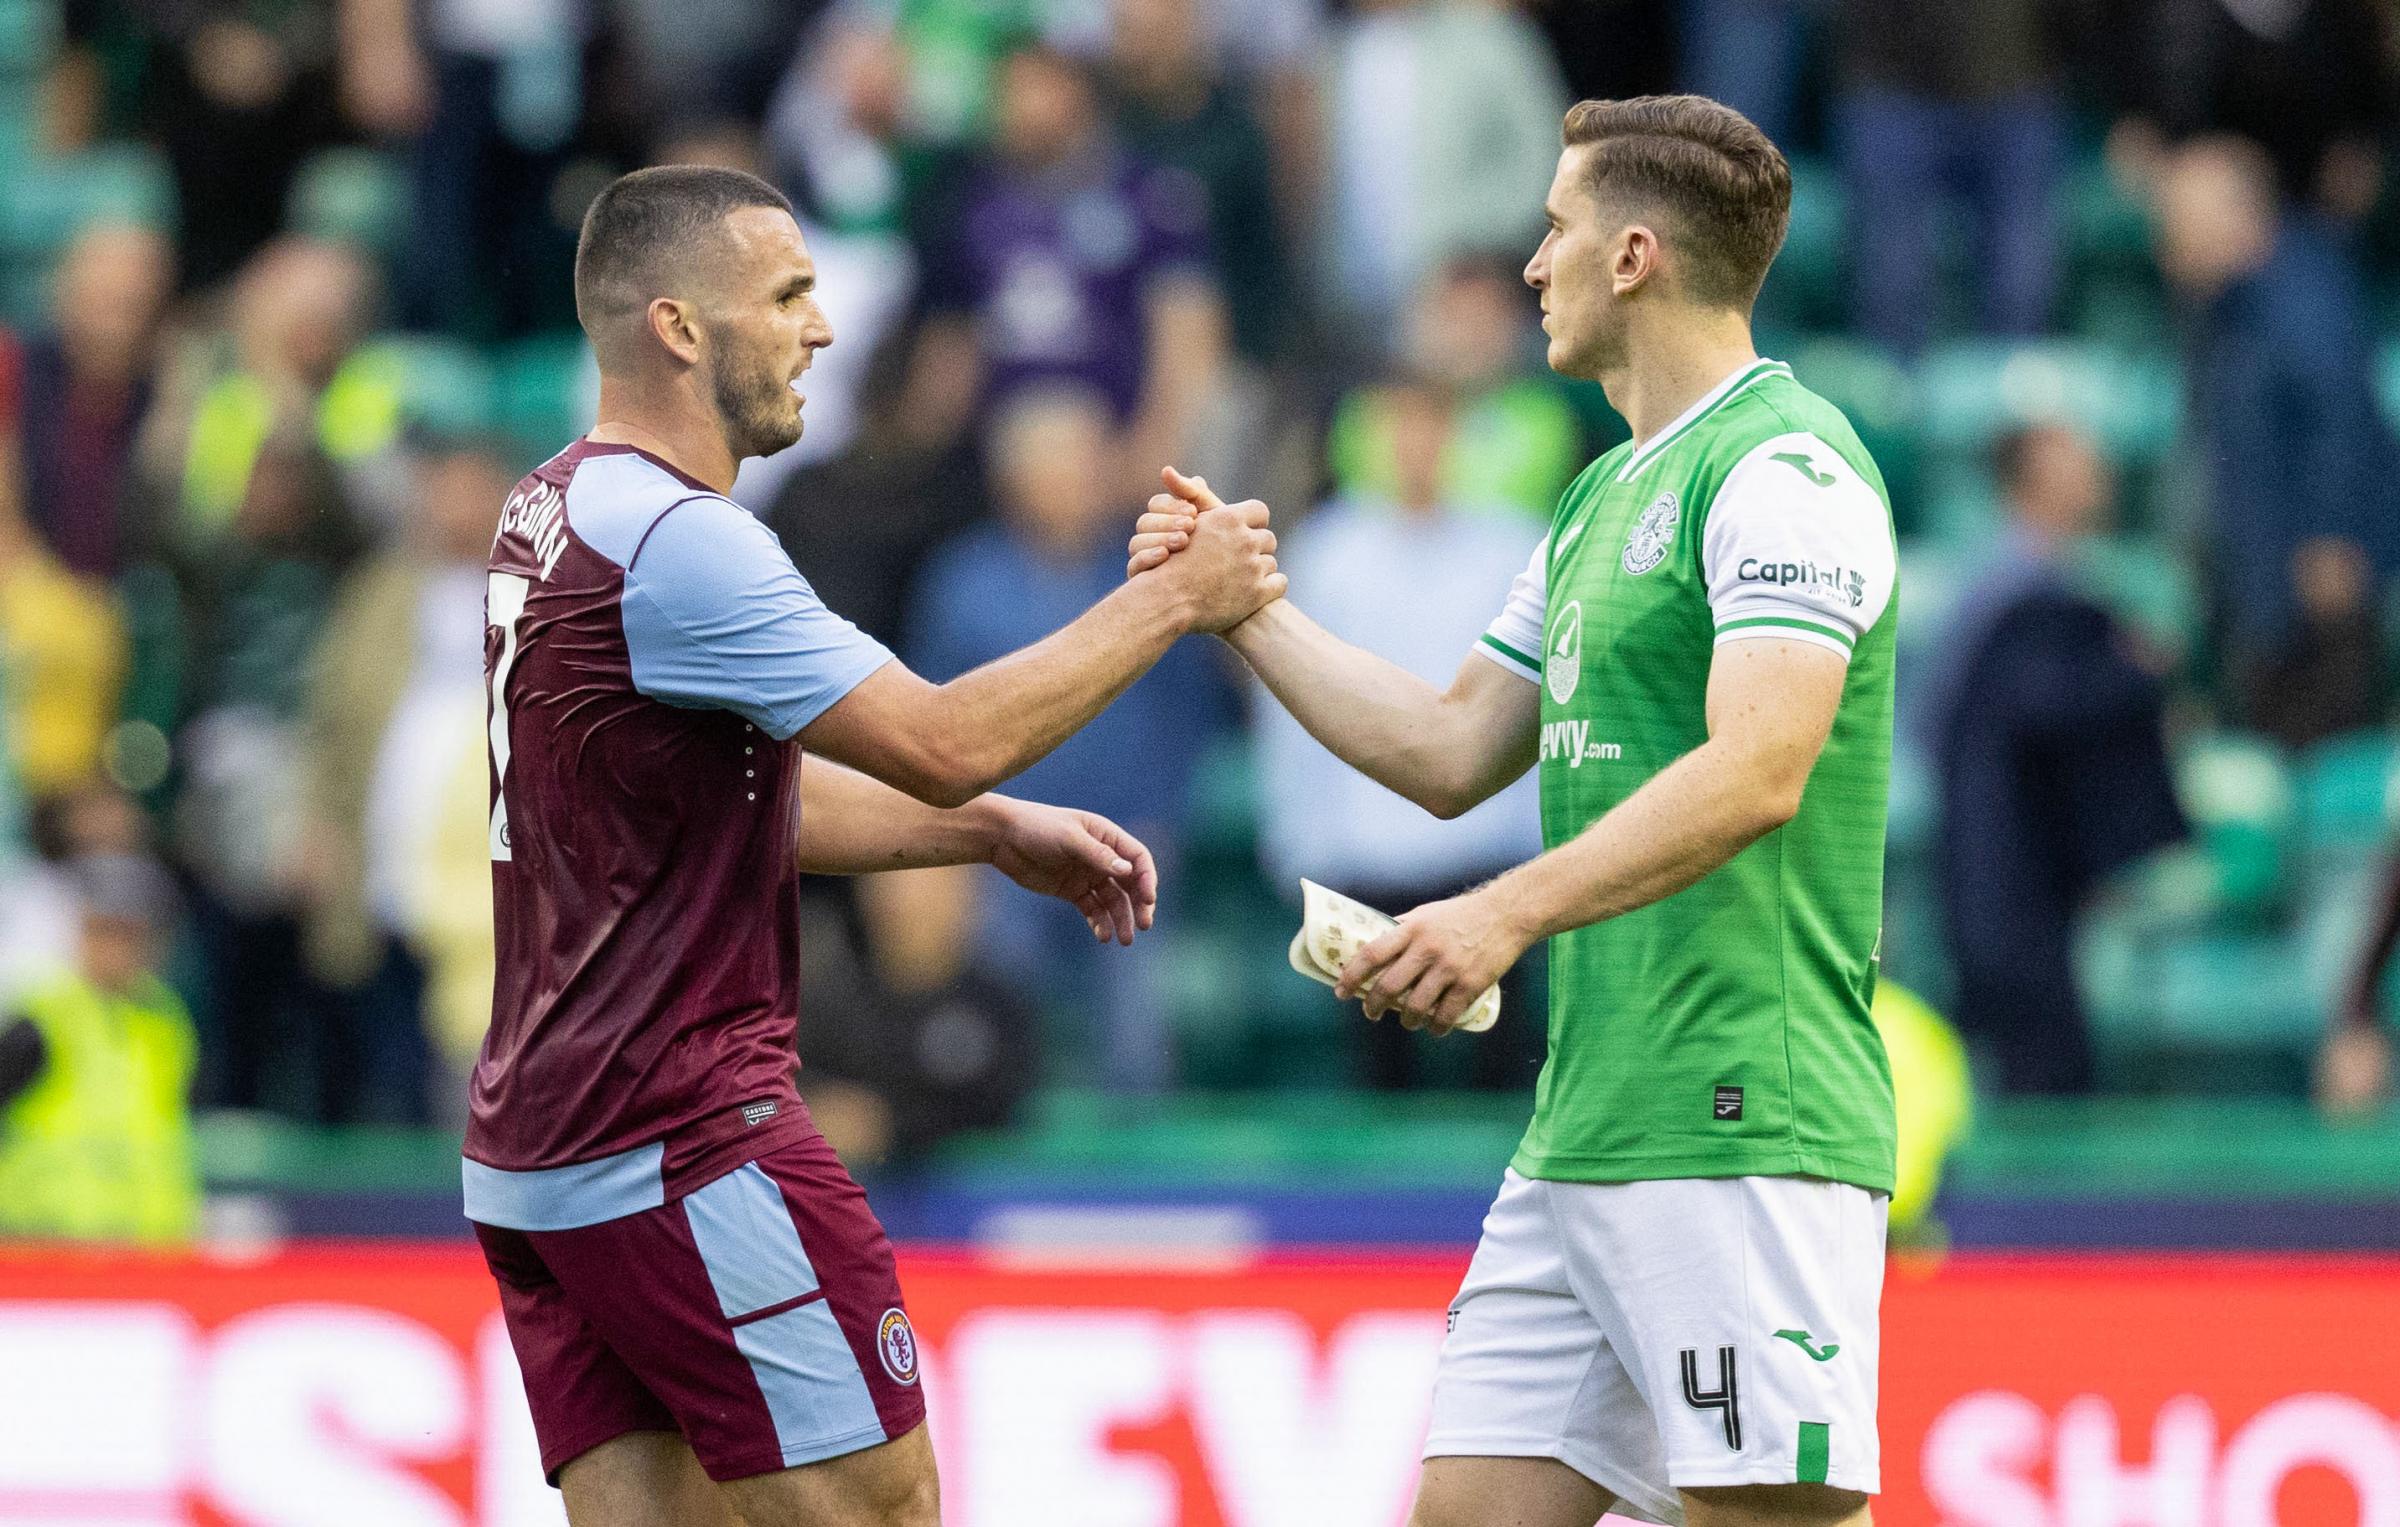 Hibs told they are making a mistake by releasing experienced pair